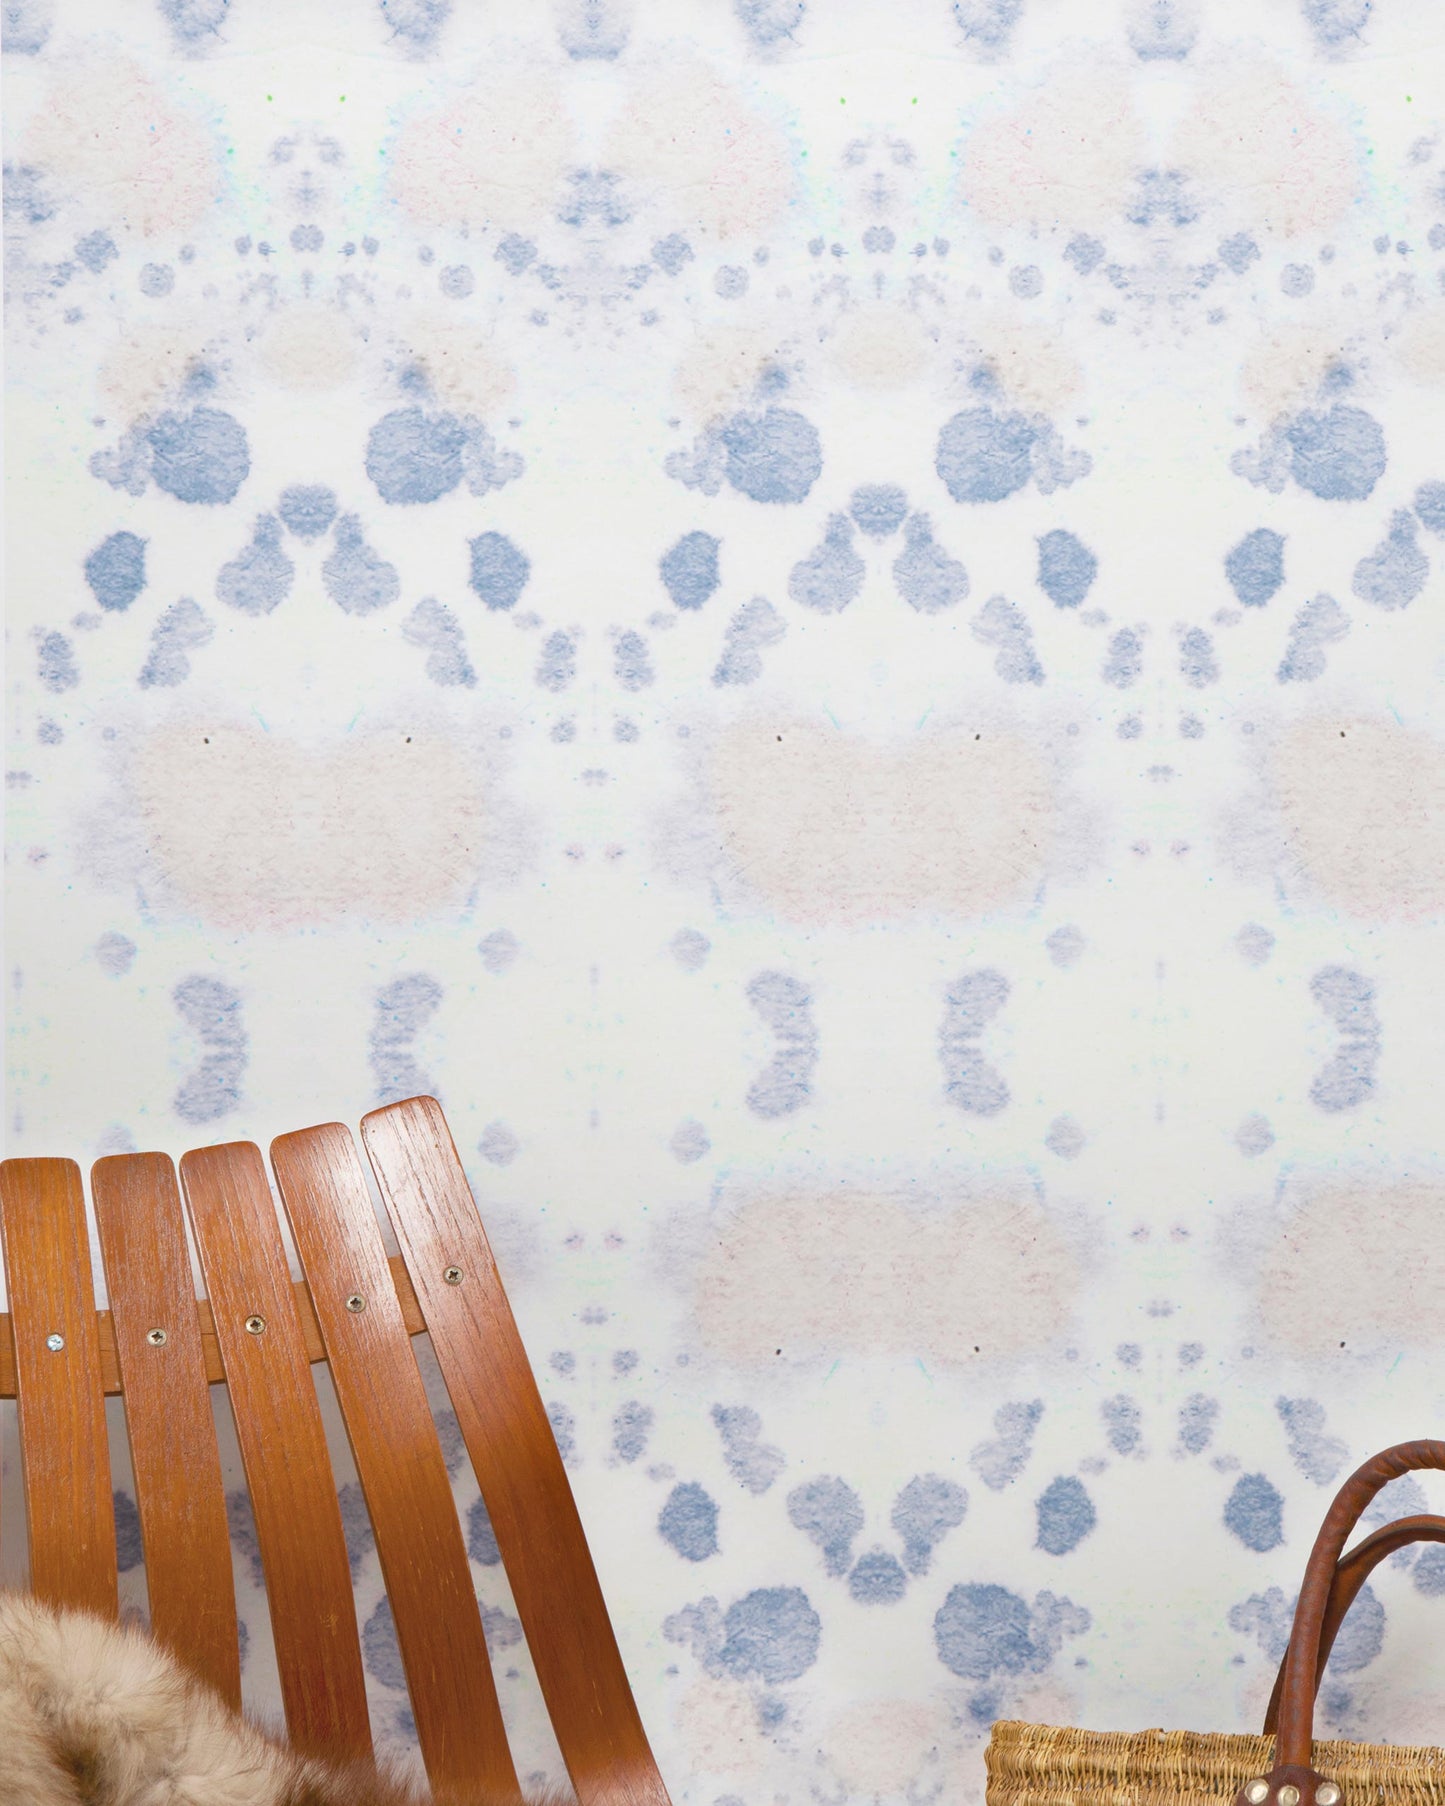 A wicker chair sits in front of a blue and white Species Wallpaper ink kaleidoscopic effect